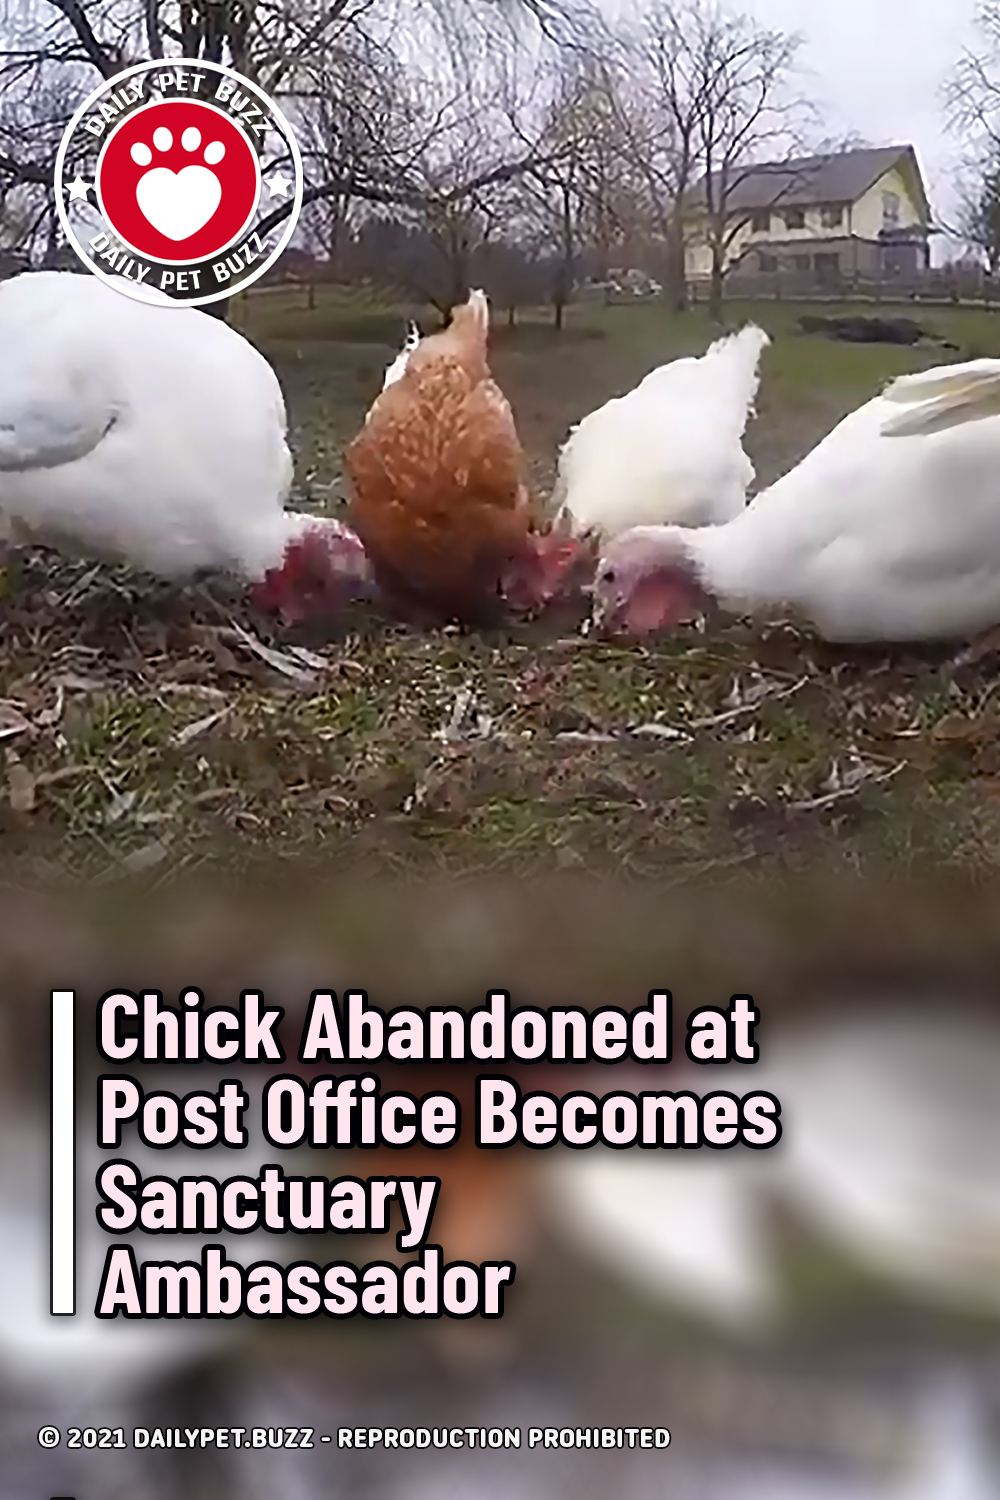 Chick Abandoned at Post Office Becomes Sanctuary Ambassador